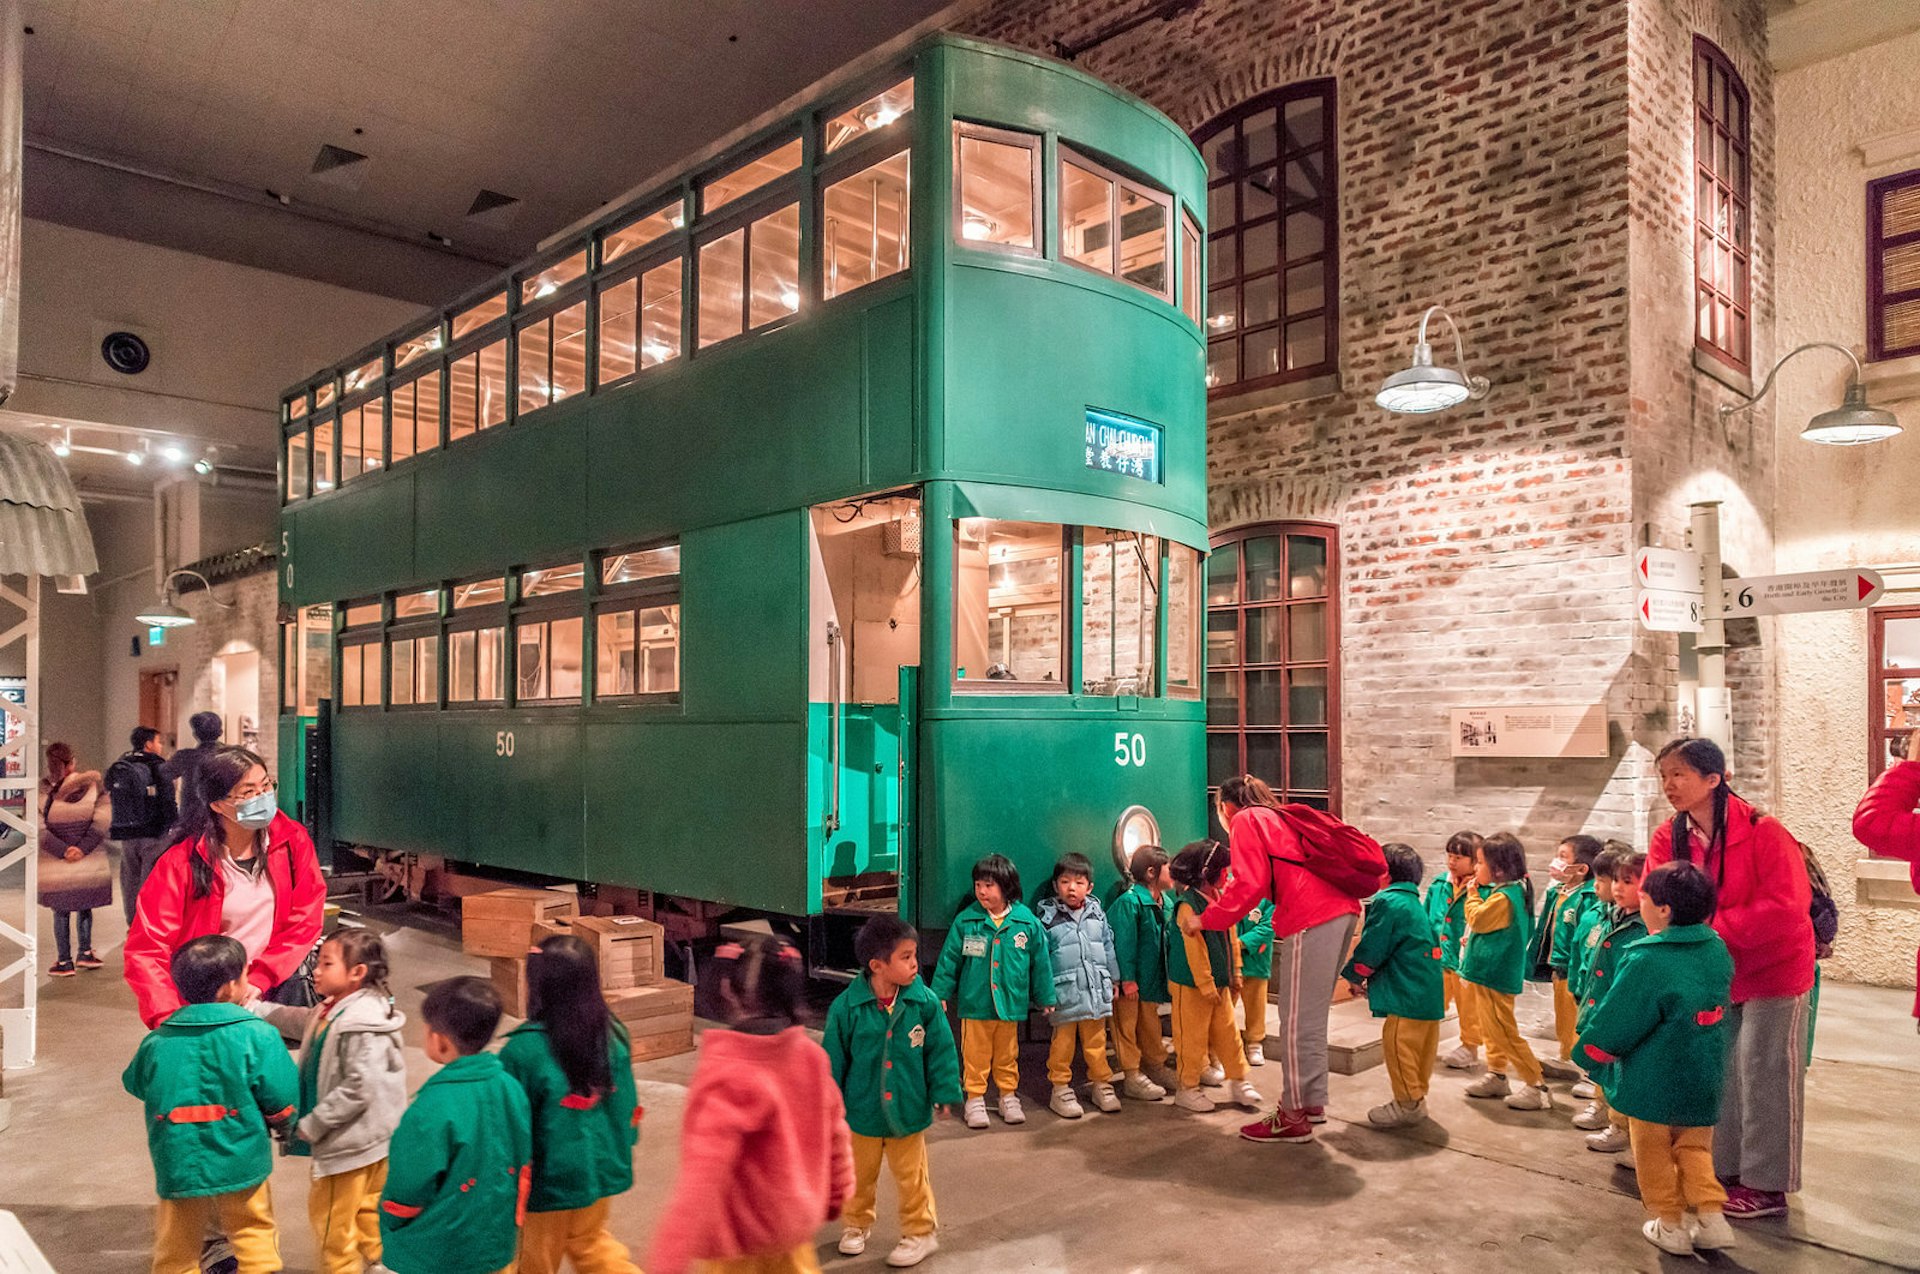 Schoolchildren examine an old tram carriage in the Hong Kong Museum of History